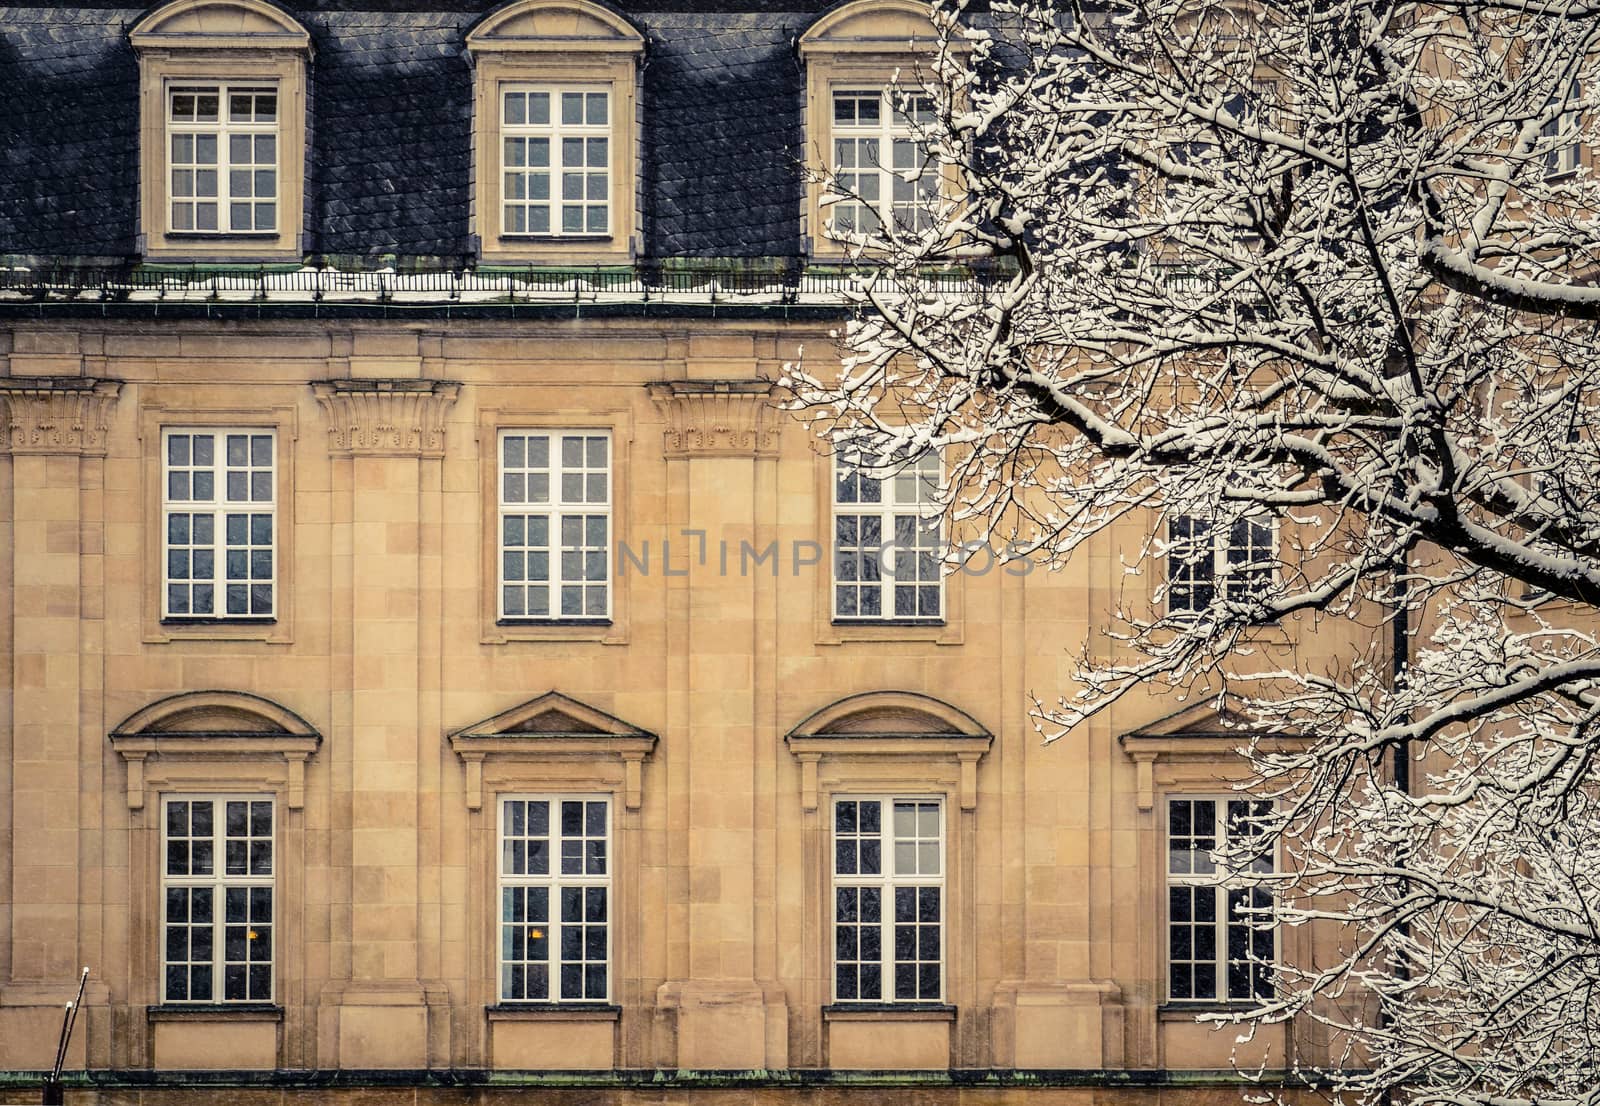 A Luxury Mansion House In Europe In The Winter Snow